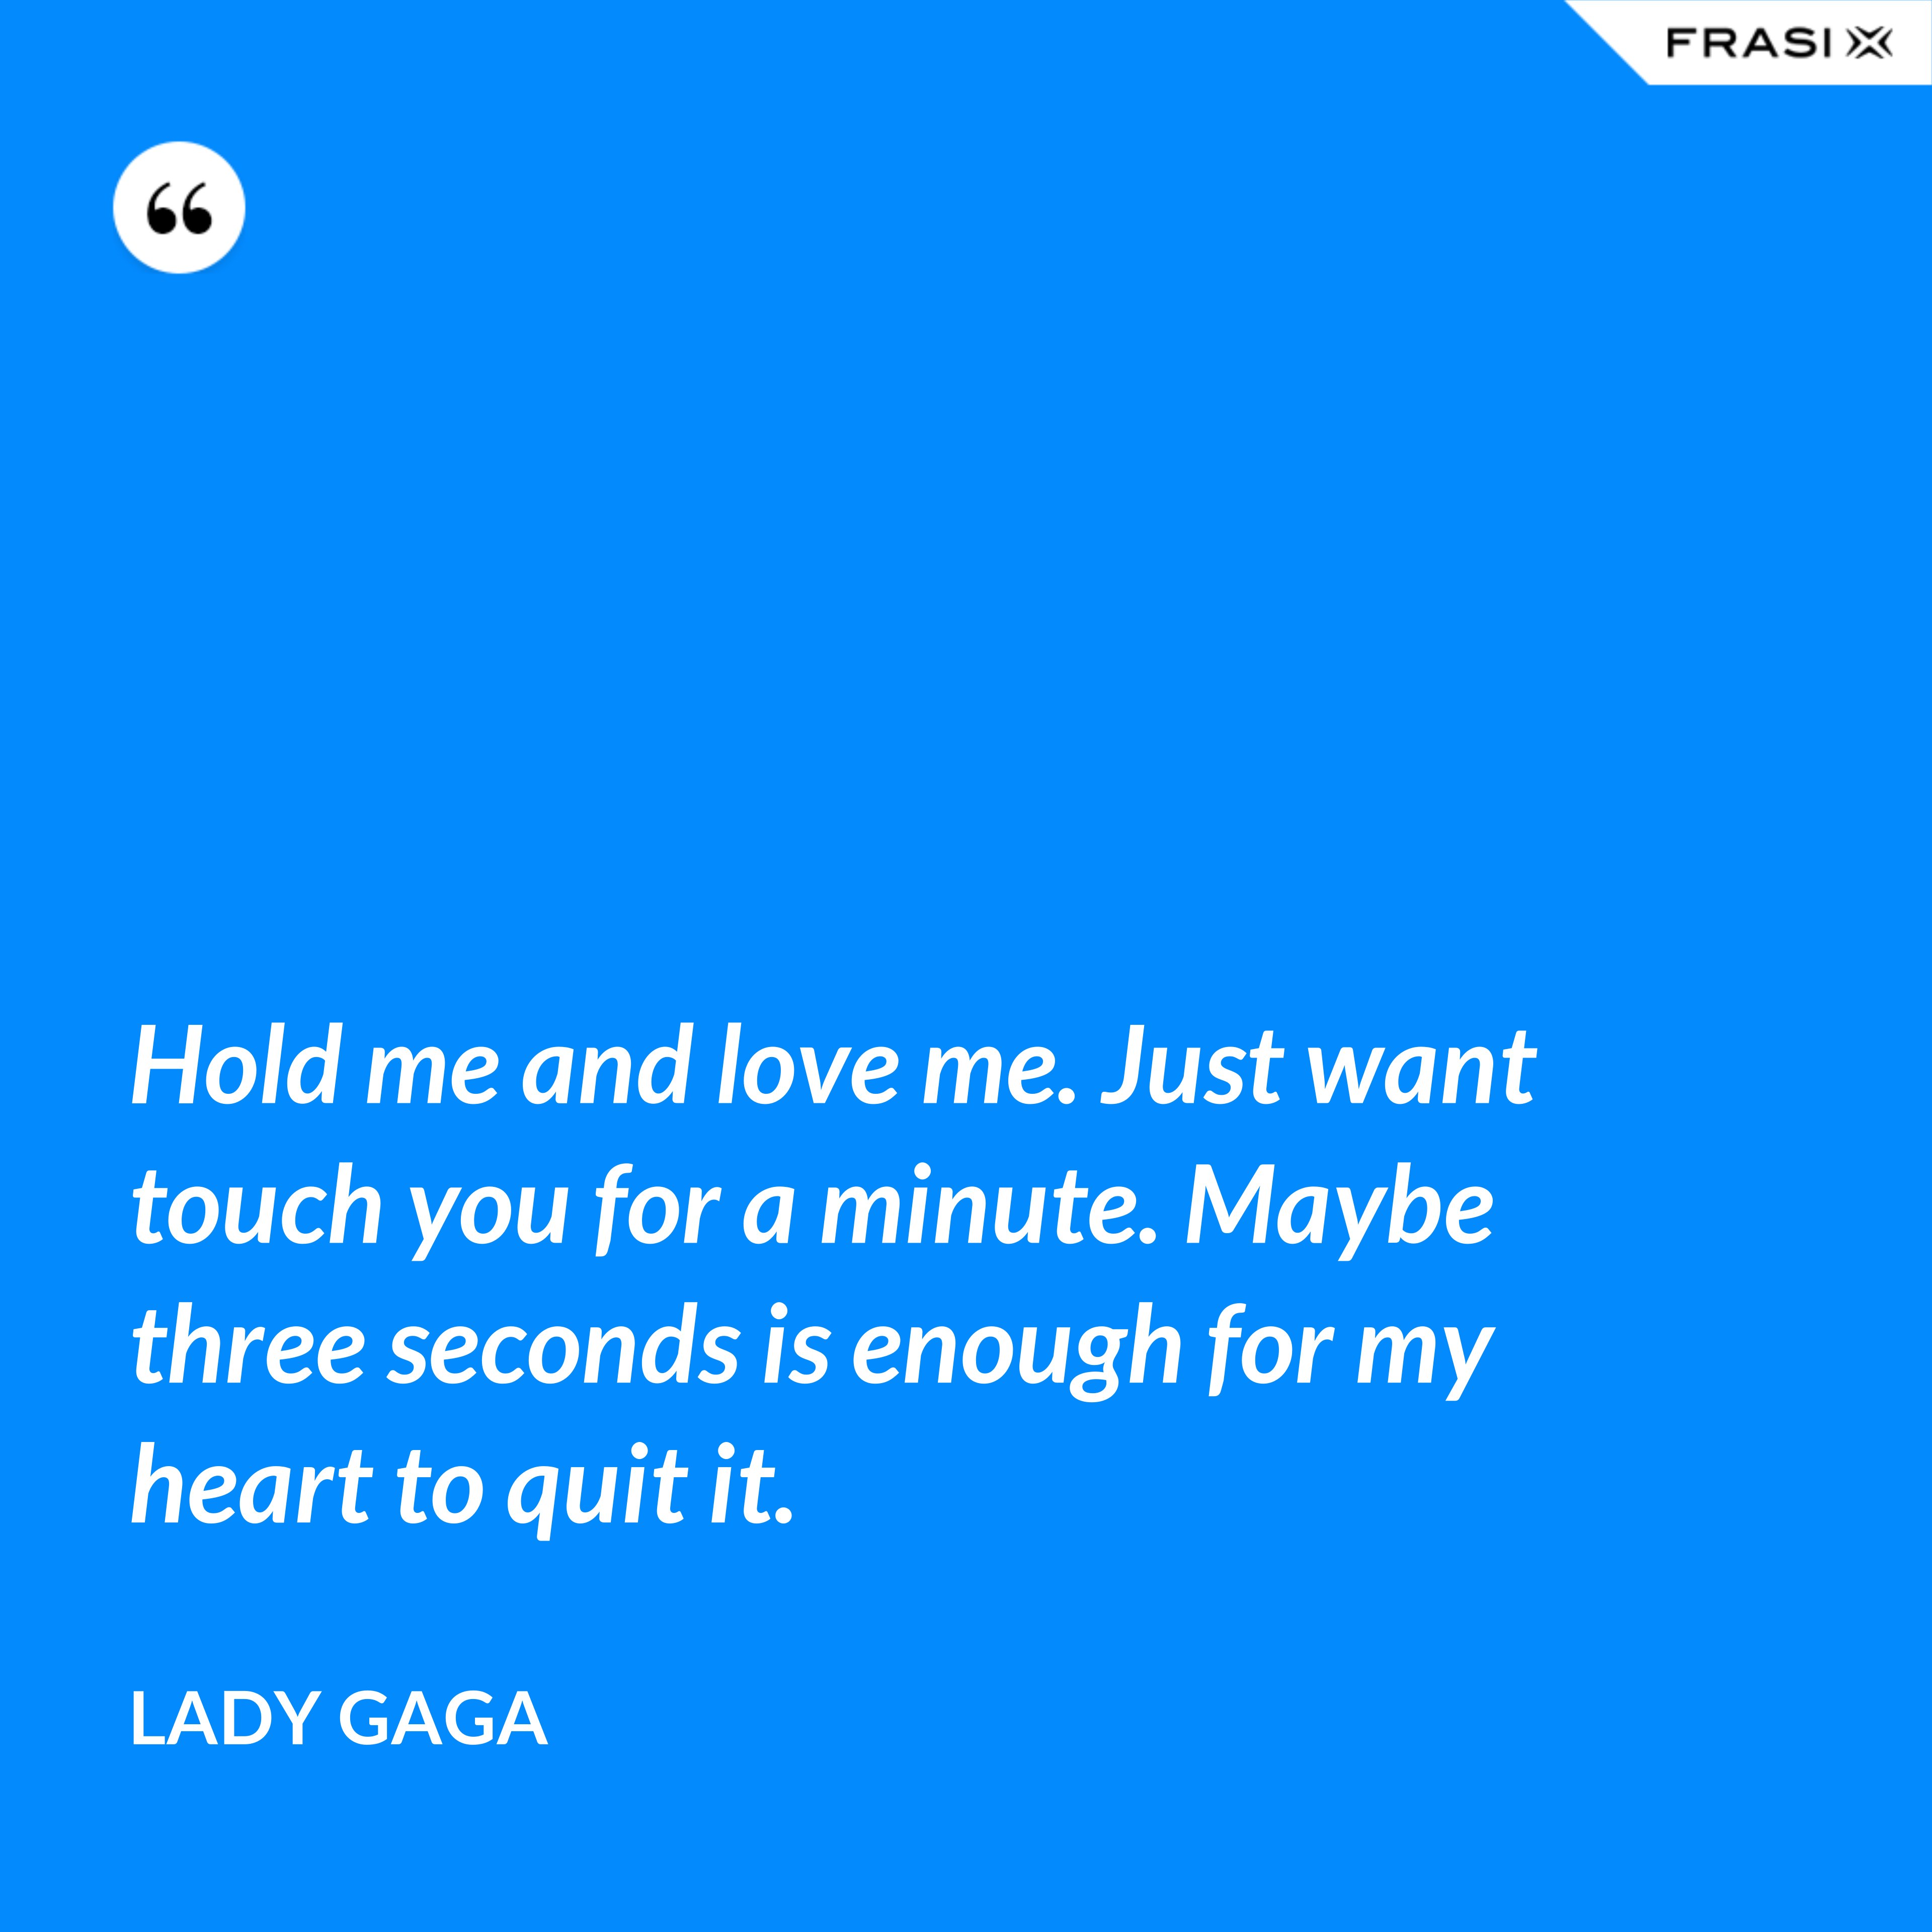 Hold me and love me. Just want touch you for a minute. Maybe three seconds is enough for my heart to quit it. - Lady Gaga